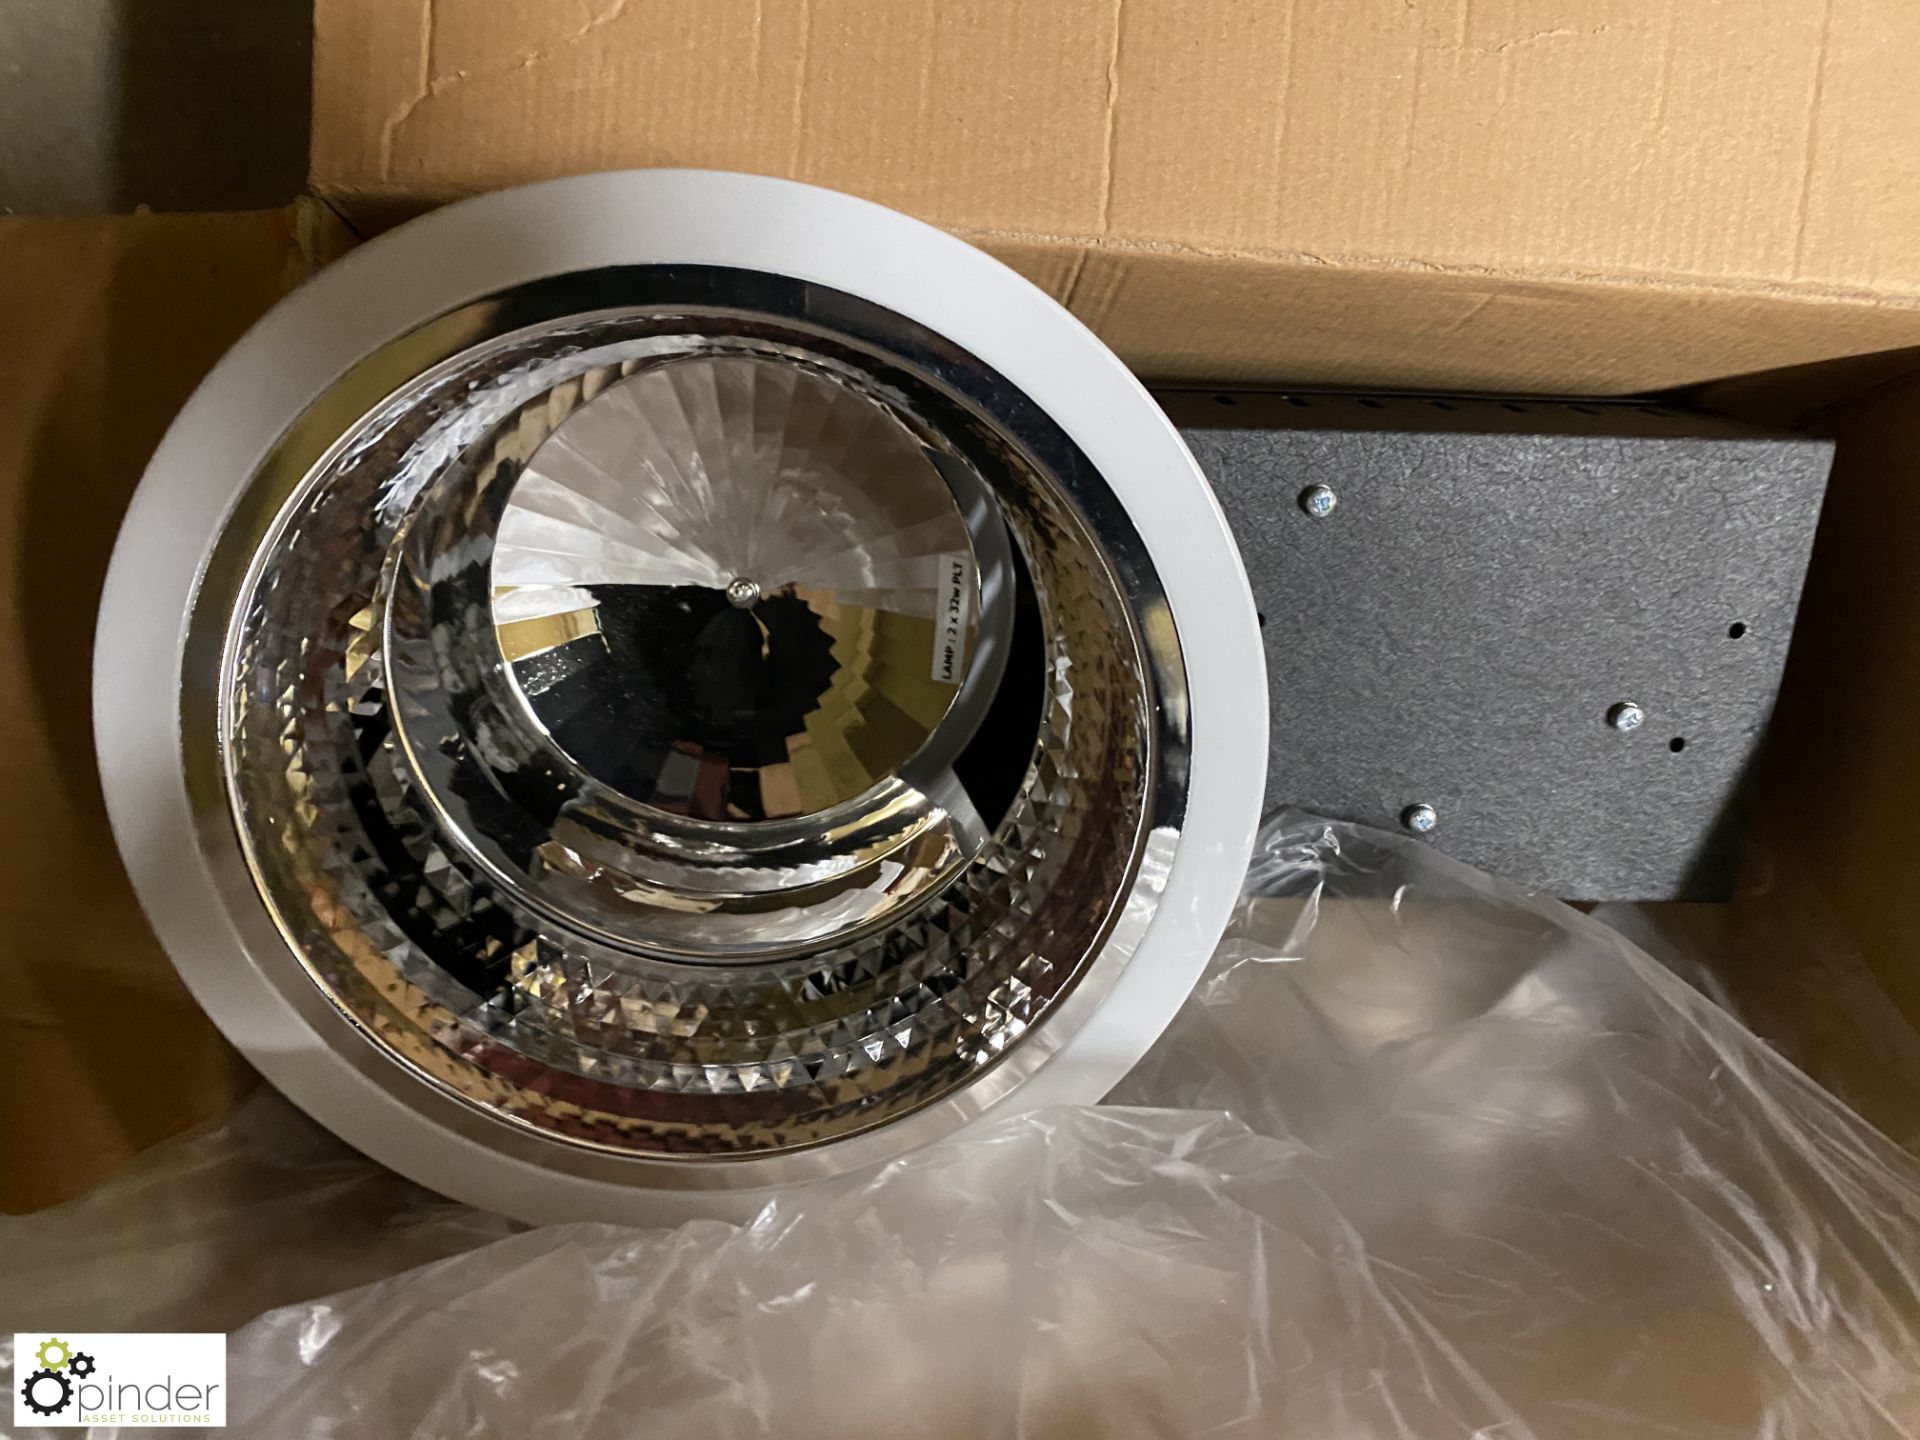 14 2x32w Downlighters, product code T7DDL232CZ (located on mezzanine)